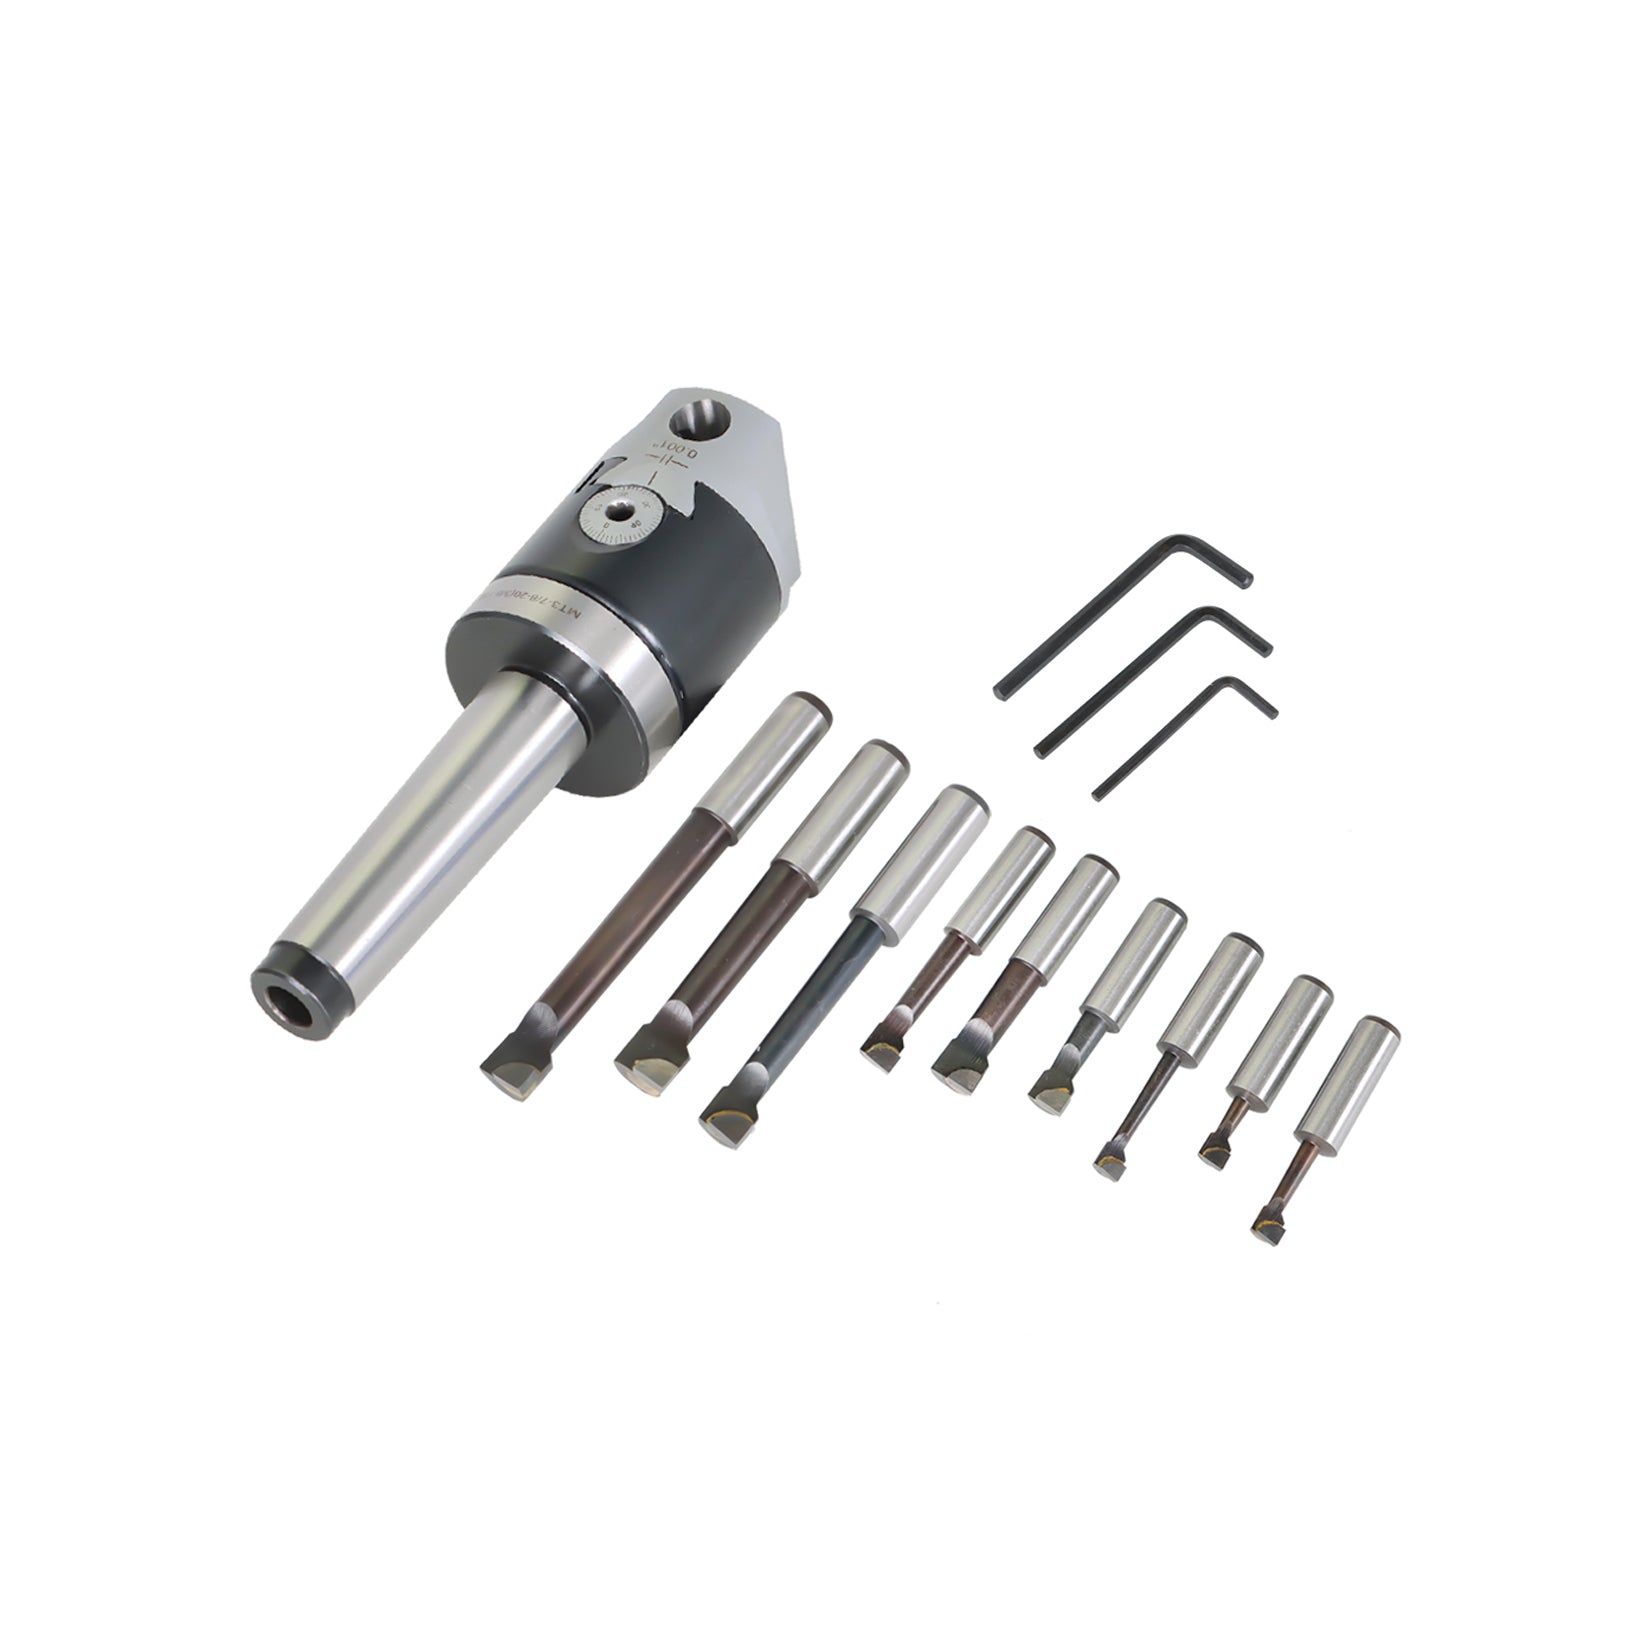 findmall  2 Inch Boring Head MT3 Carbide Boring Bar Set Milling Set Fit for Milling, Shaping and Drilling Machines FINDMALLPARTS